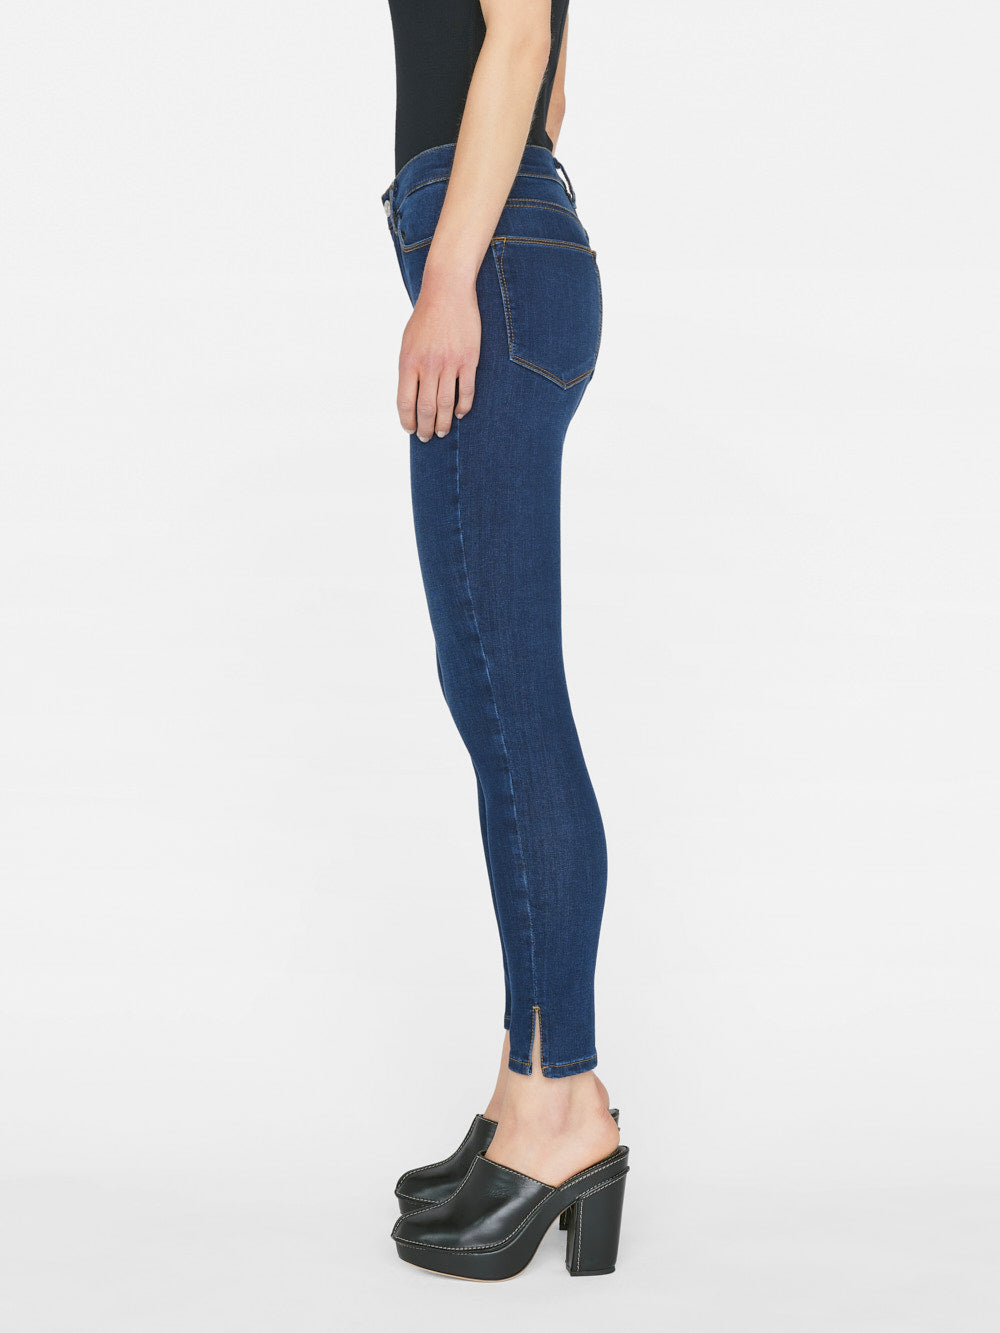 The back view of a woman wearing a pair of Frame Le High Skinny Outseam Slit - Majesty jeans, showcasing the form-fitting silhouette and sustainable stretch cotton blend.